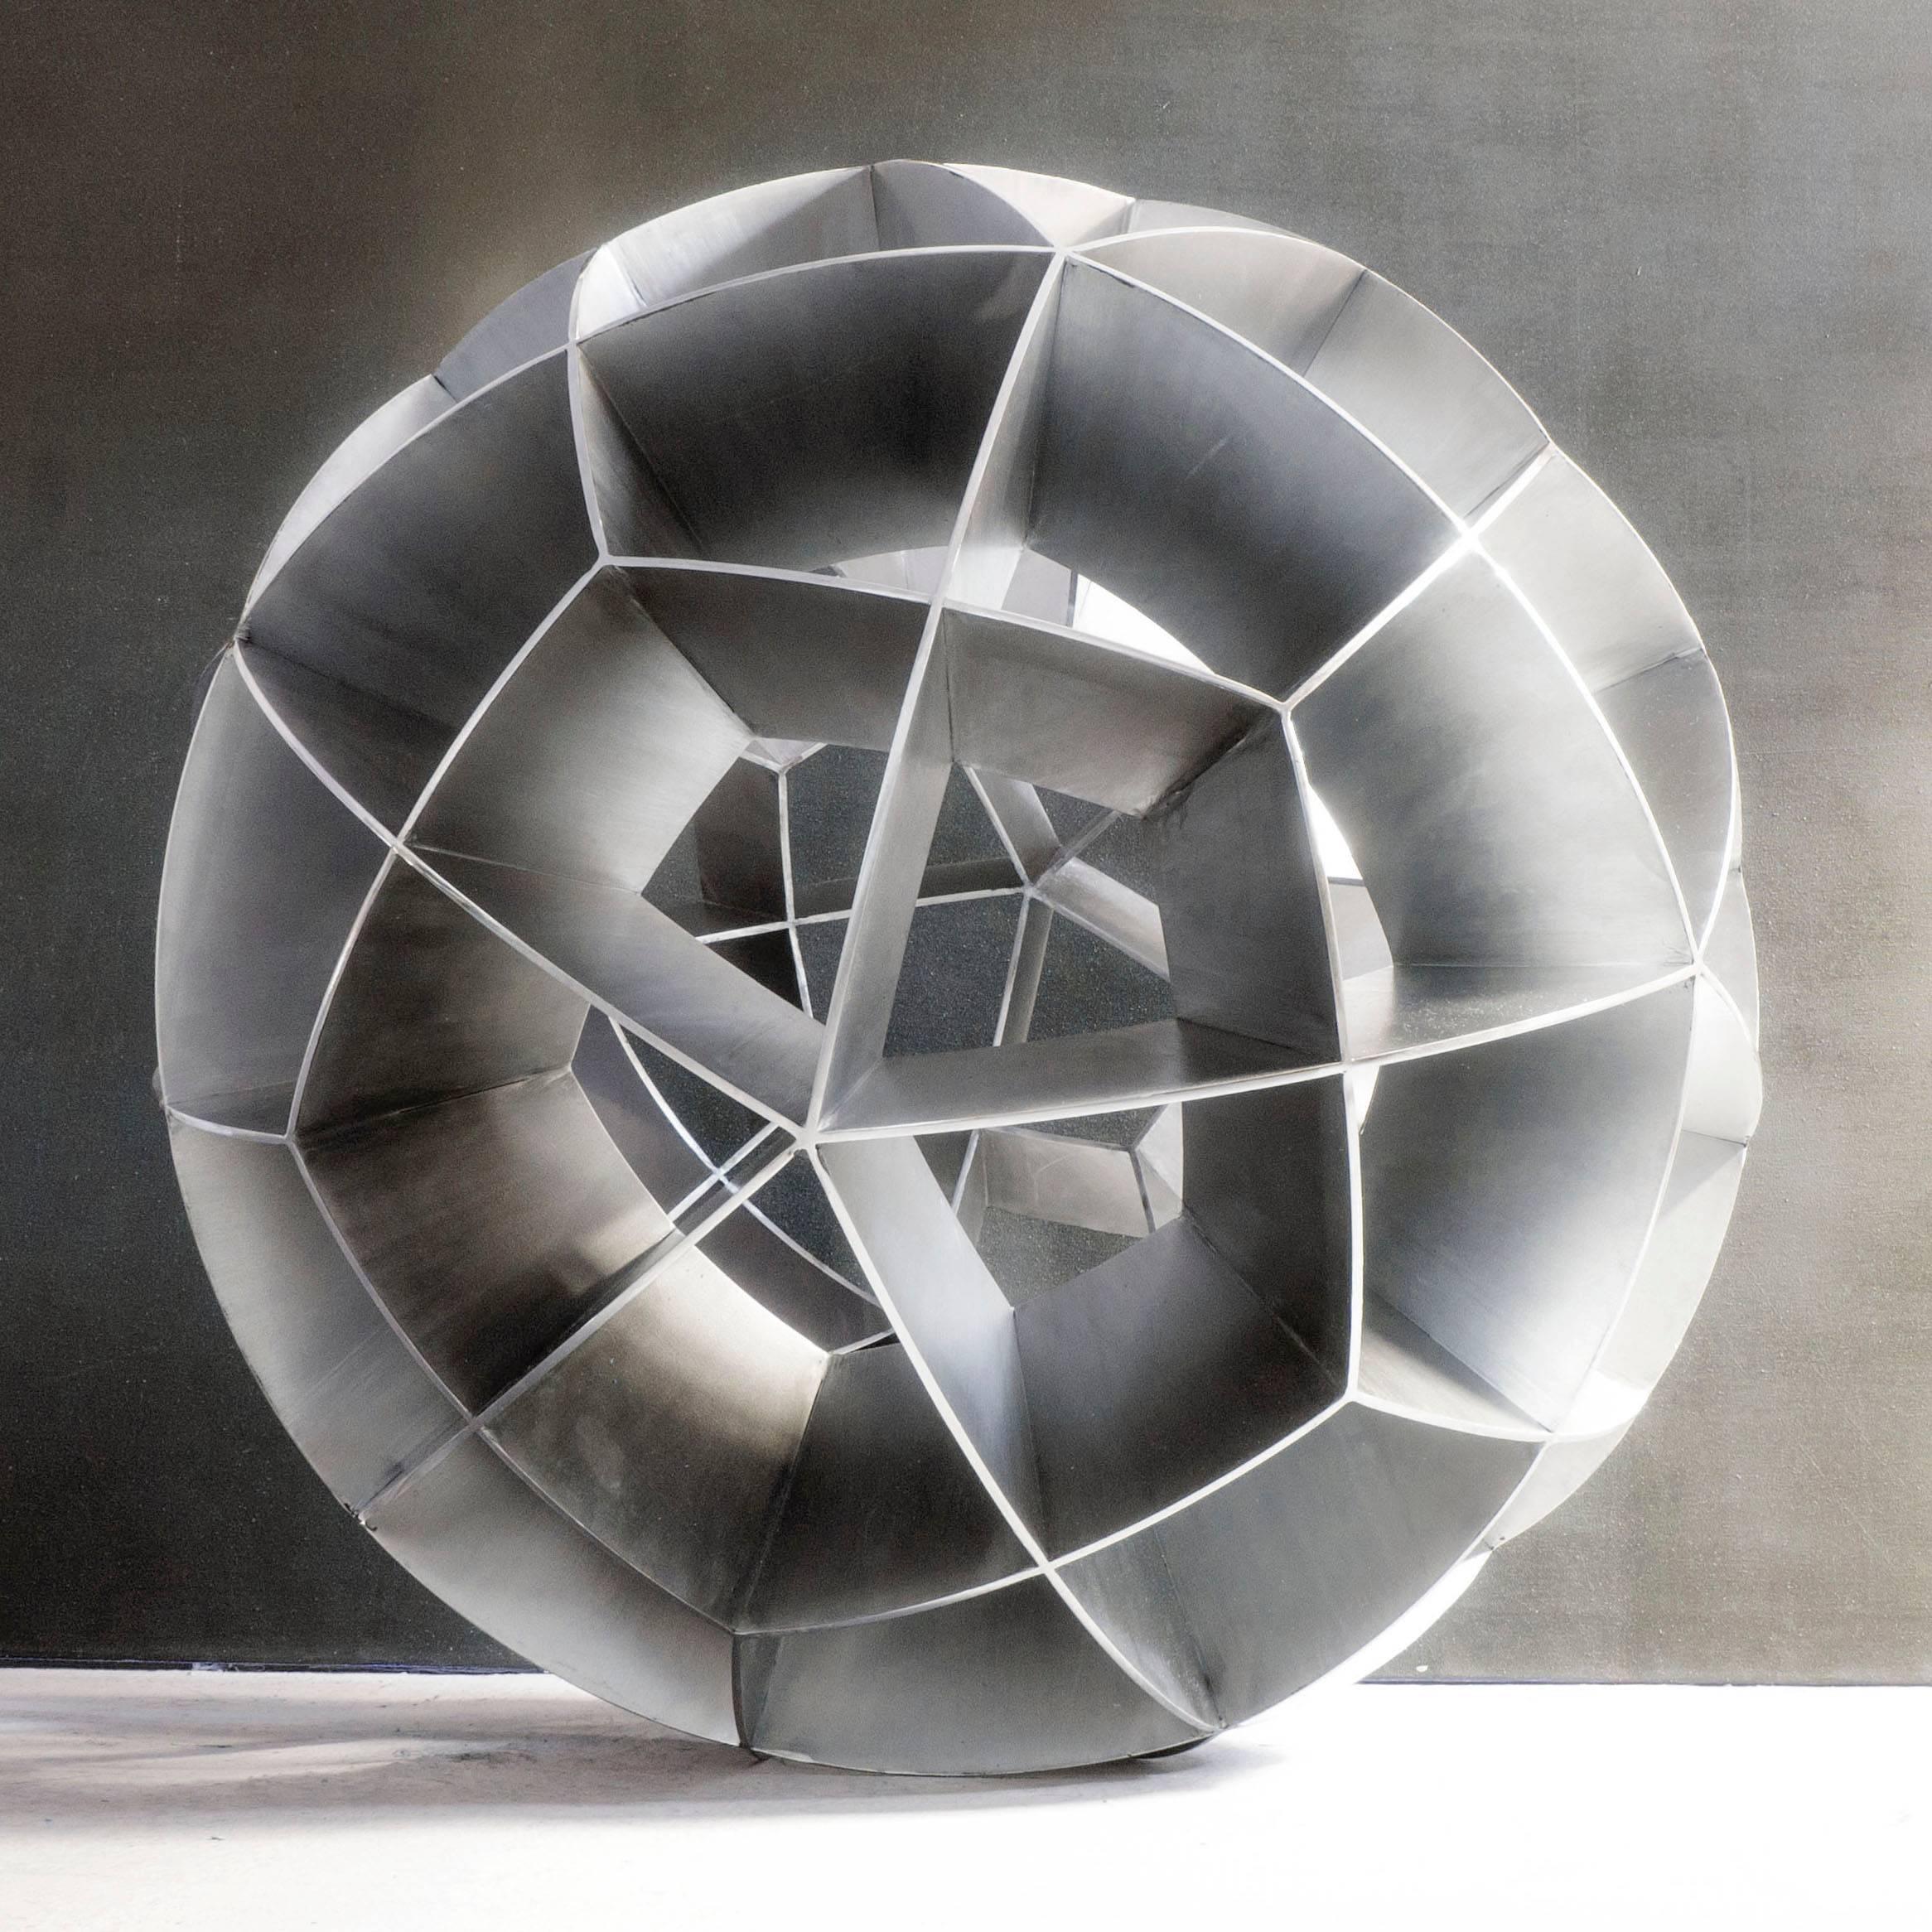 Welded Contemporary Mexican Geometric Stainless Steel Trapezoidal Sphere Sculpture